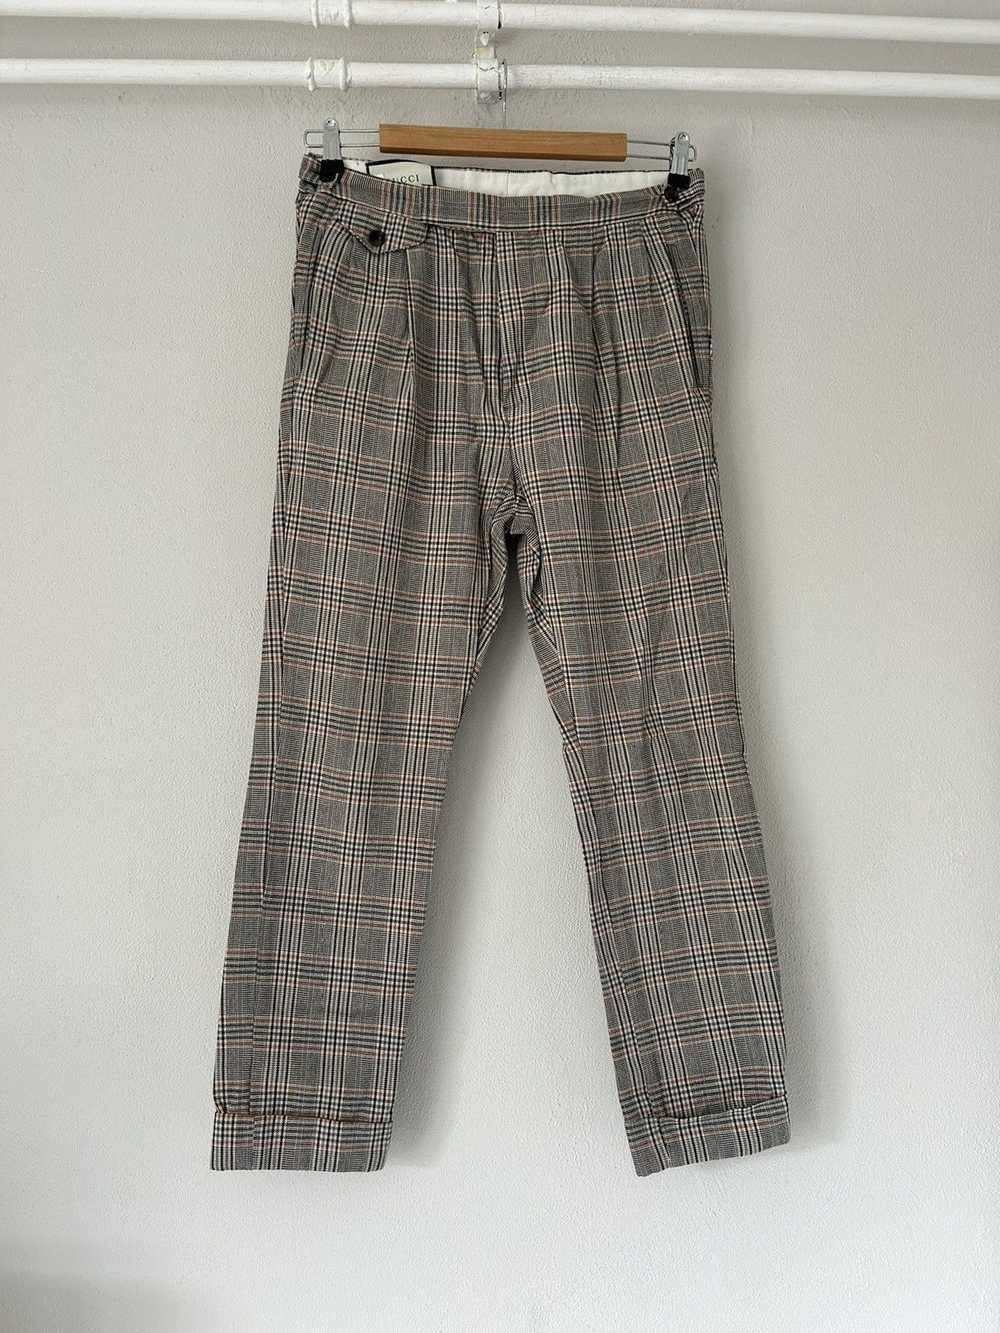 Gucci Checkered Plaid Trousers - image 1